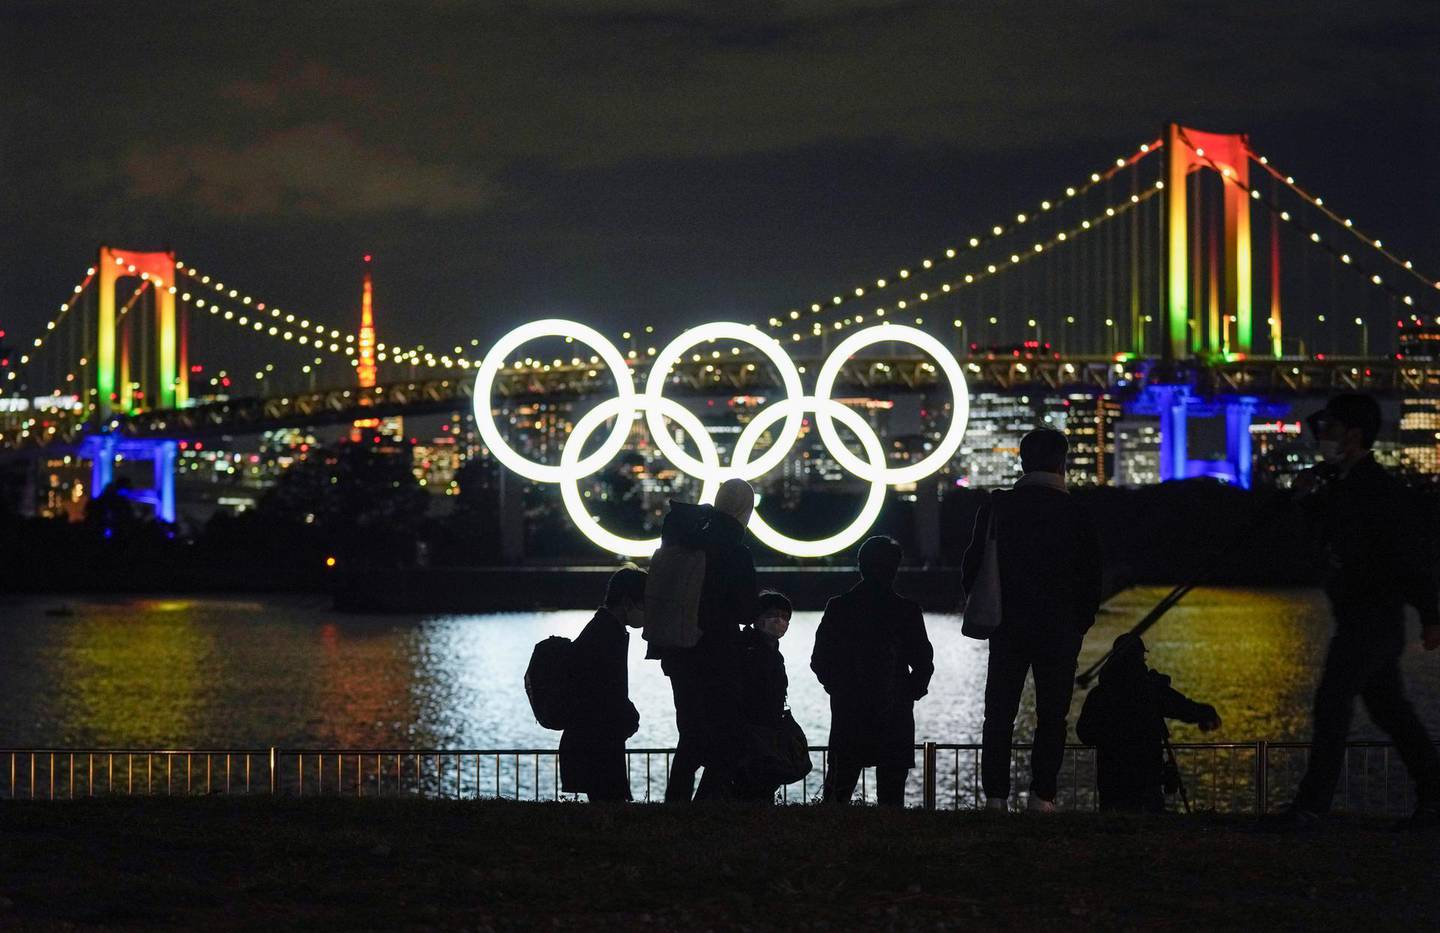 epa08854256 An Olympic rings monument is illuminated as photographers leave after taking photos of the rings lit at the waterfront of Odaiba Marine Park, in Tokyo, Japan, 01 December 2020. The Olympic rings monument has been reinstalled to its original location after maintenance work. The Tokyo 2020 Olympic Games have been rescheduled to open 23 July 2021 and run through 08 August 2021, due to the coronavirus pandemic.  EPA/KIMIMASA MAYAMA